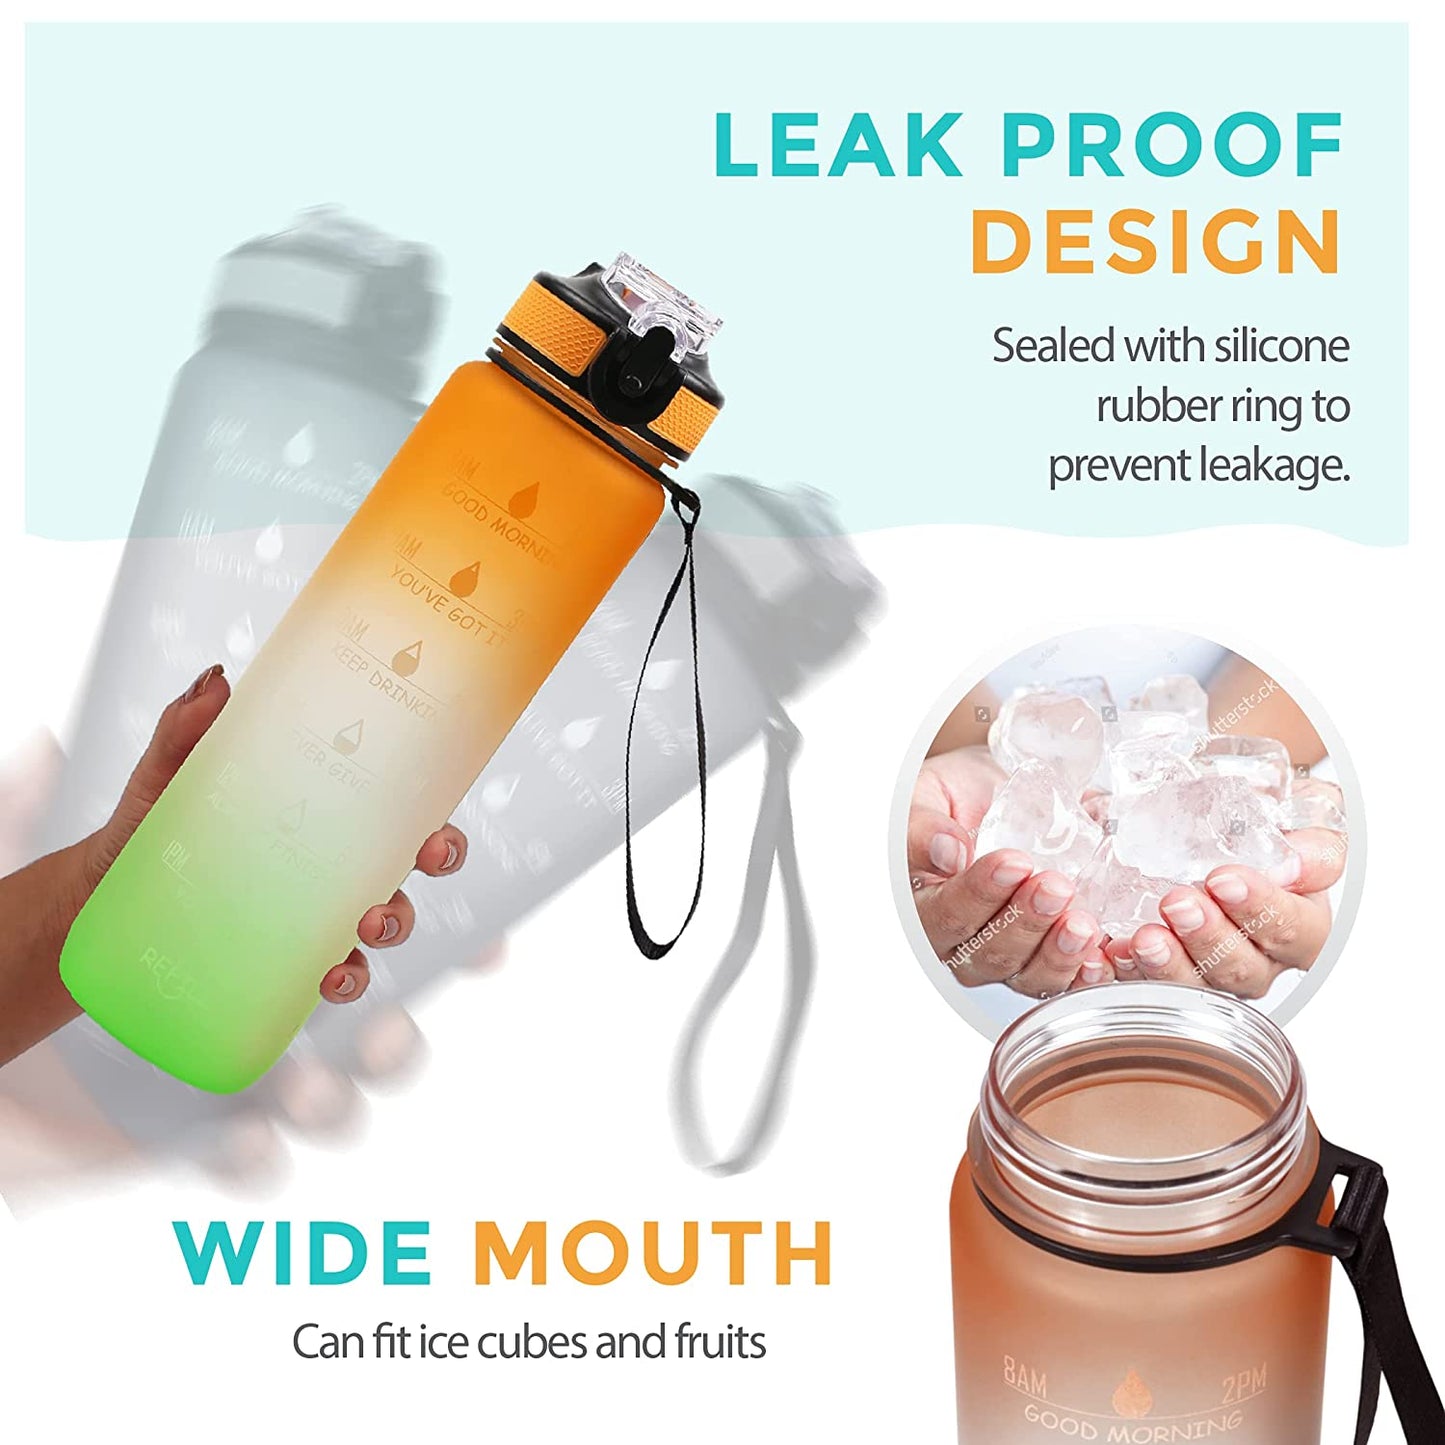 Unbreakable Sipper Water Bottle - 1 Litre 💧  | 4-5 Days FREE Shipping 📦 🇮🇳